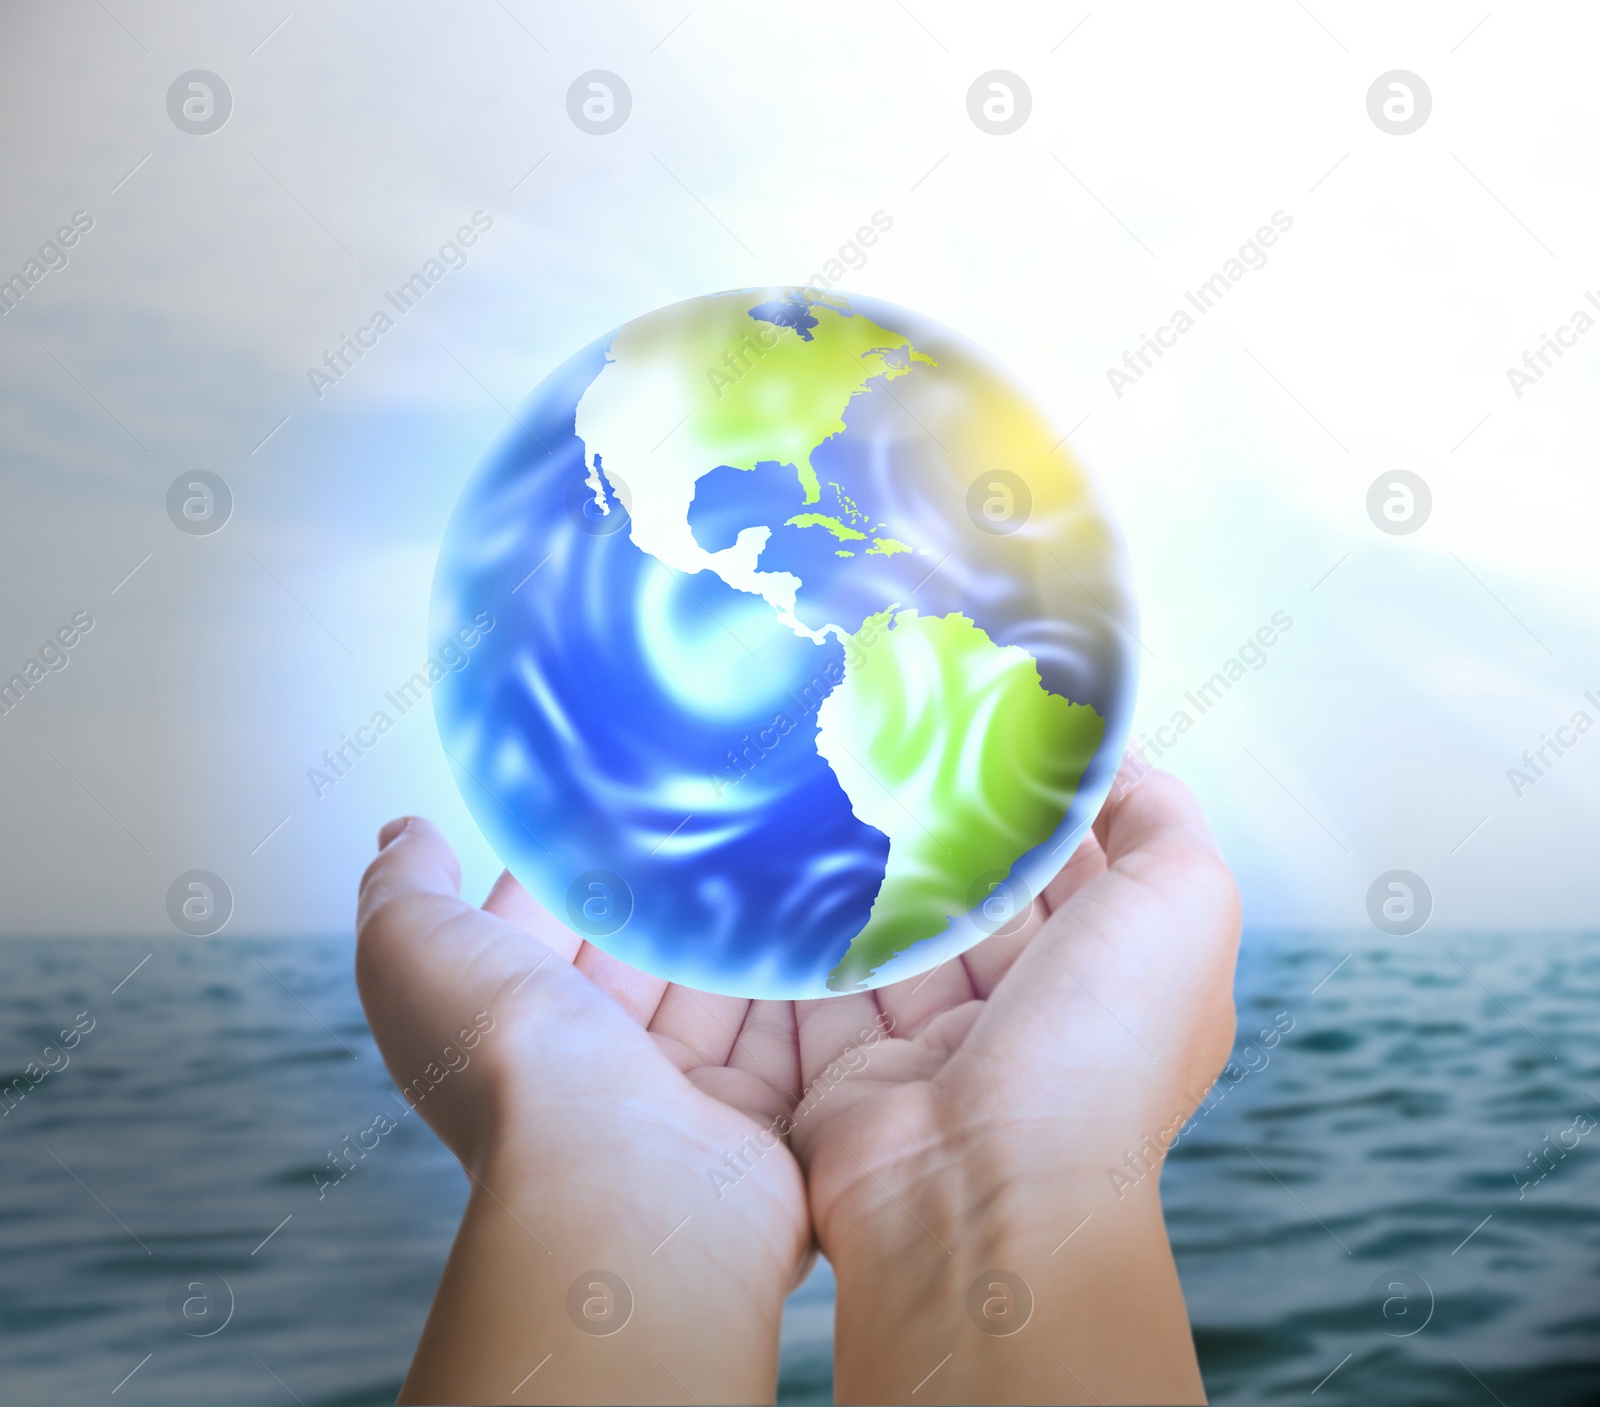 Image of Woman holding Earth near ocean, closeup view